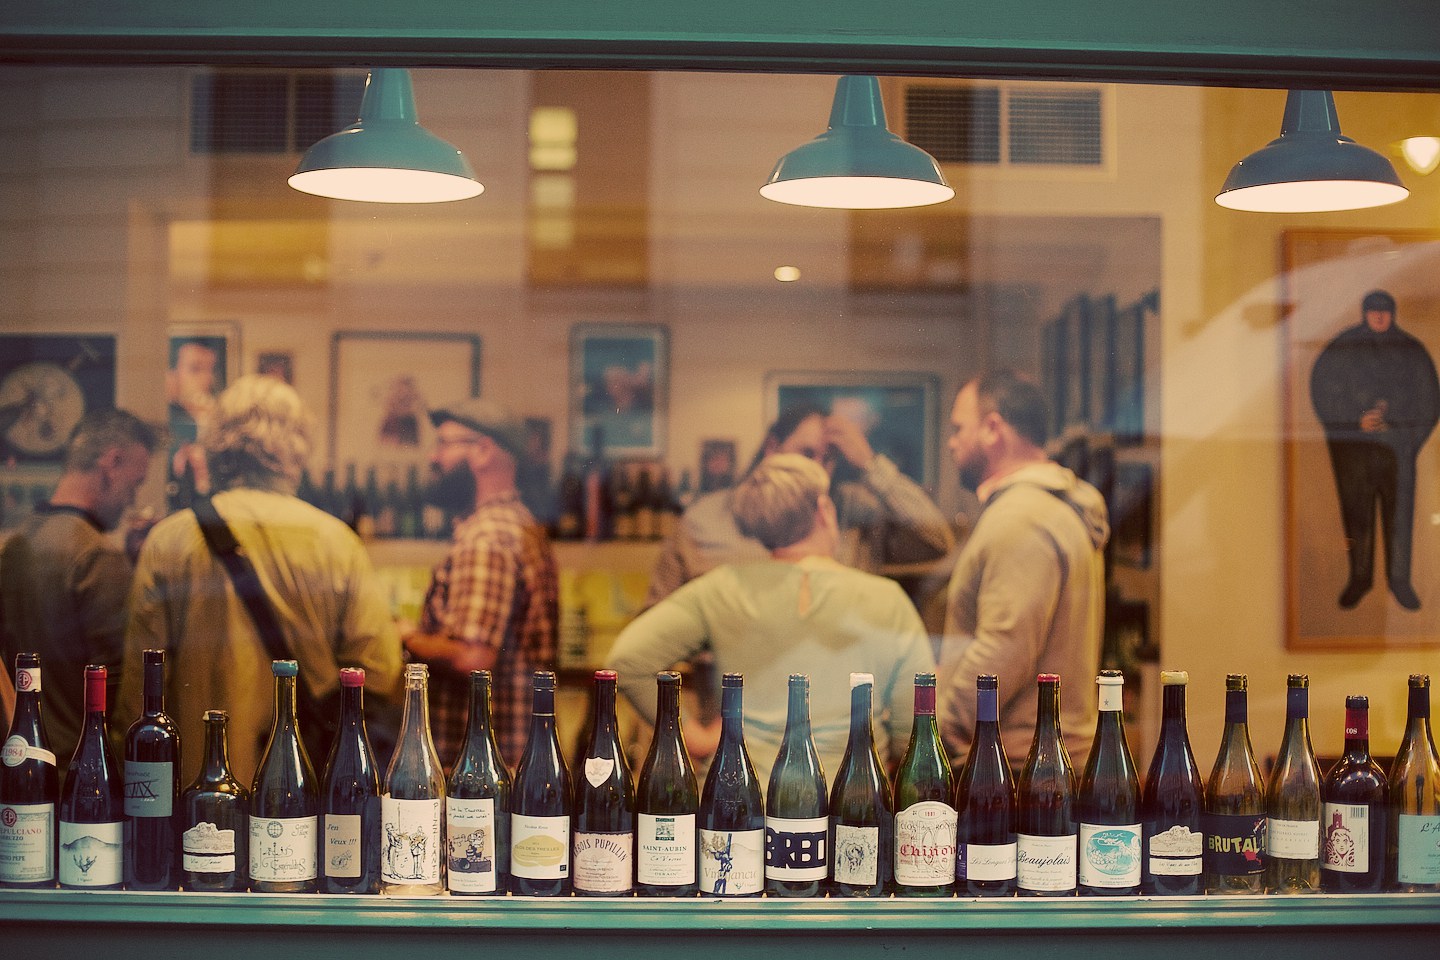 A crowd of wine drinkers seen through a front window, its sill lined with emptied bottles.